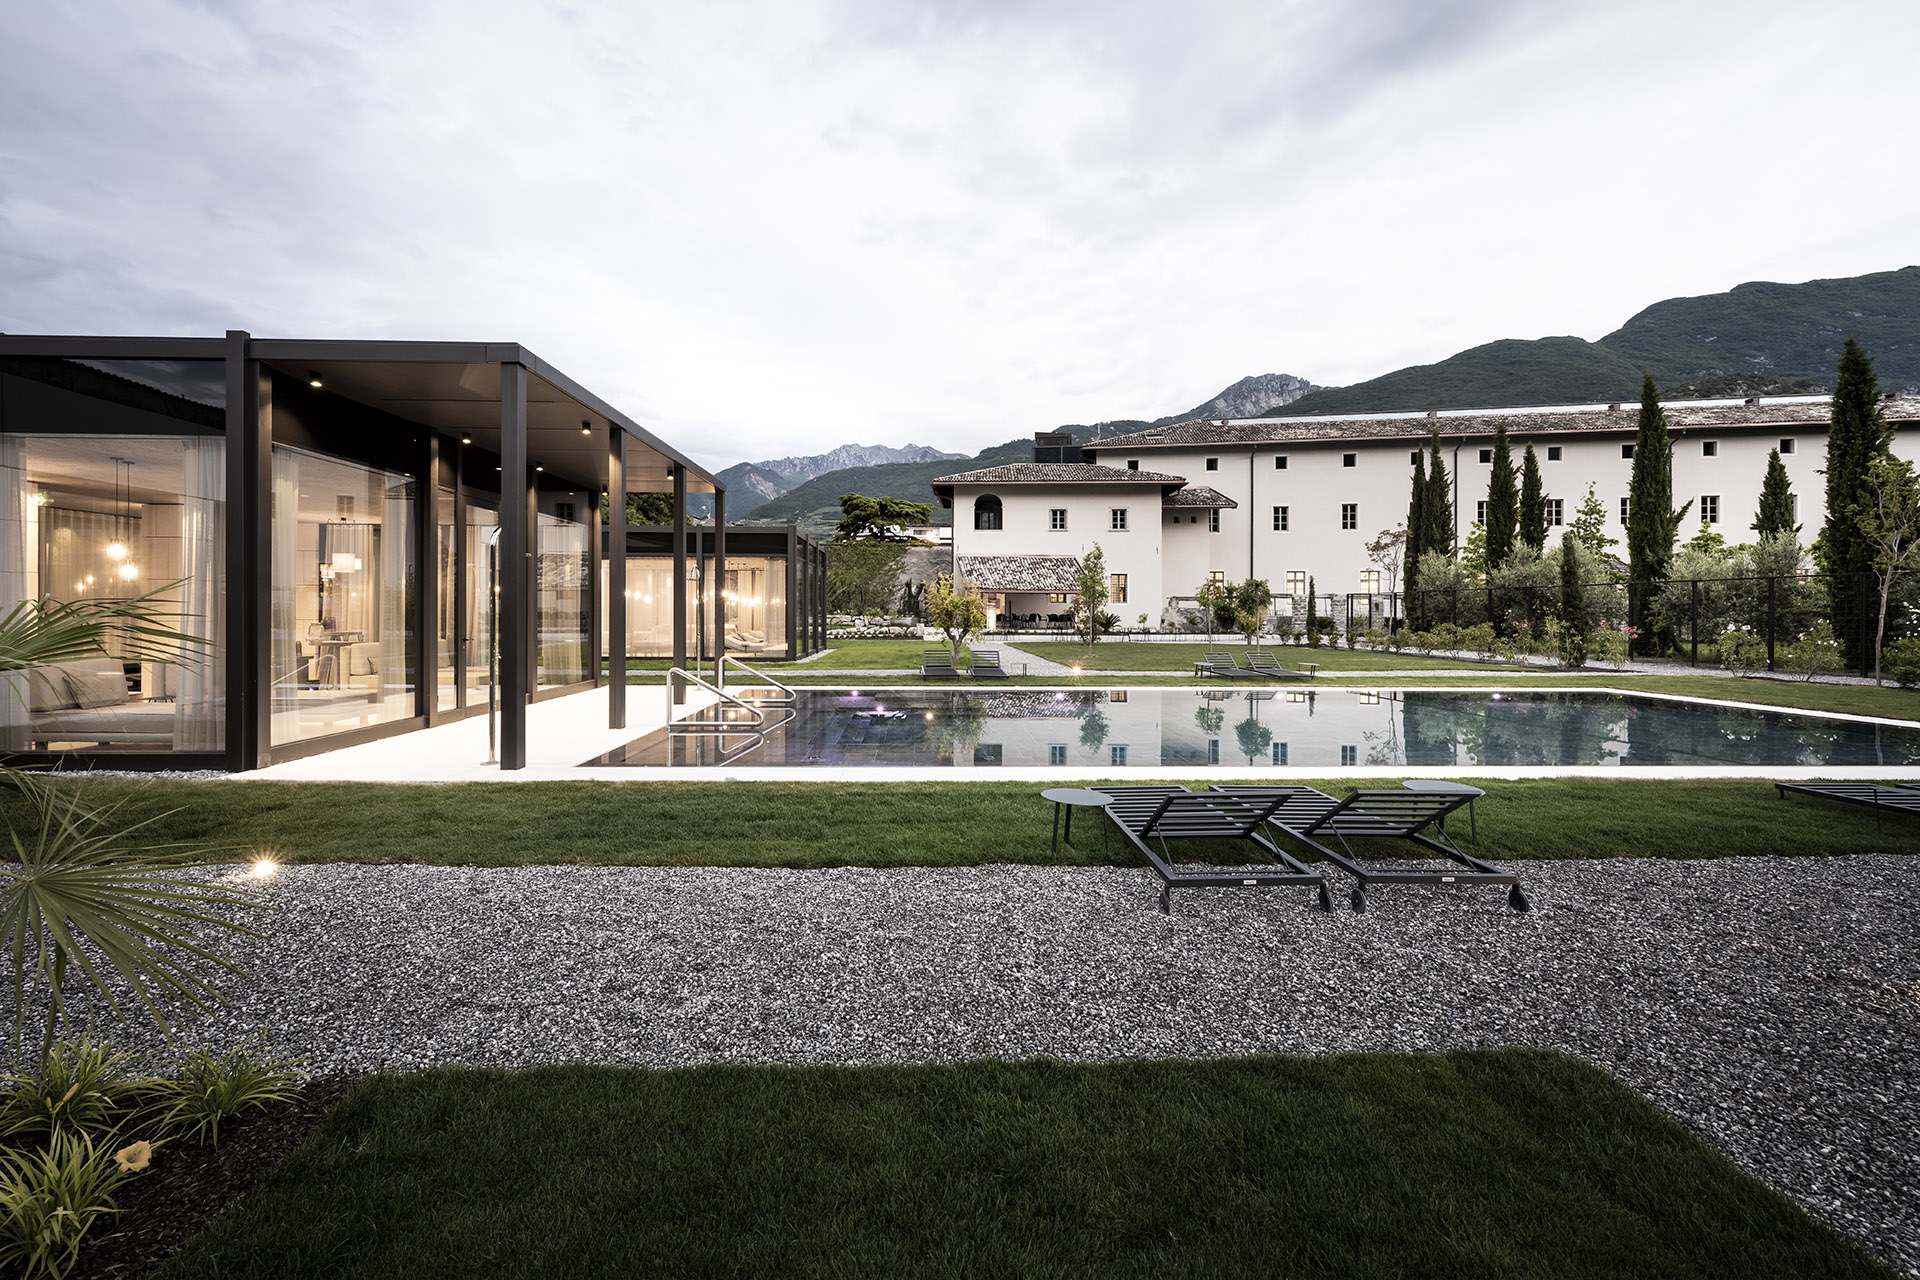 Hotel and spa inside a 17th-century monastery for an out-of-time experience on the shores of Lake Garda